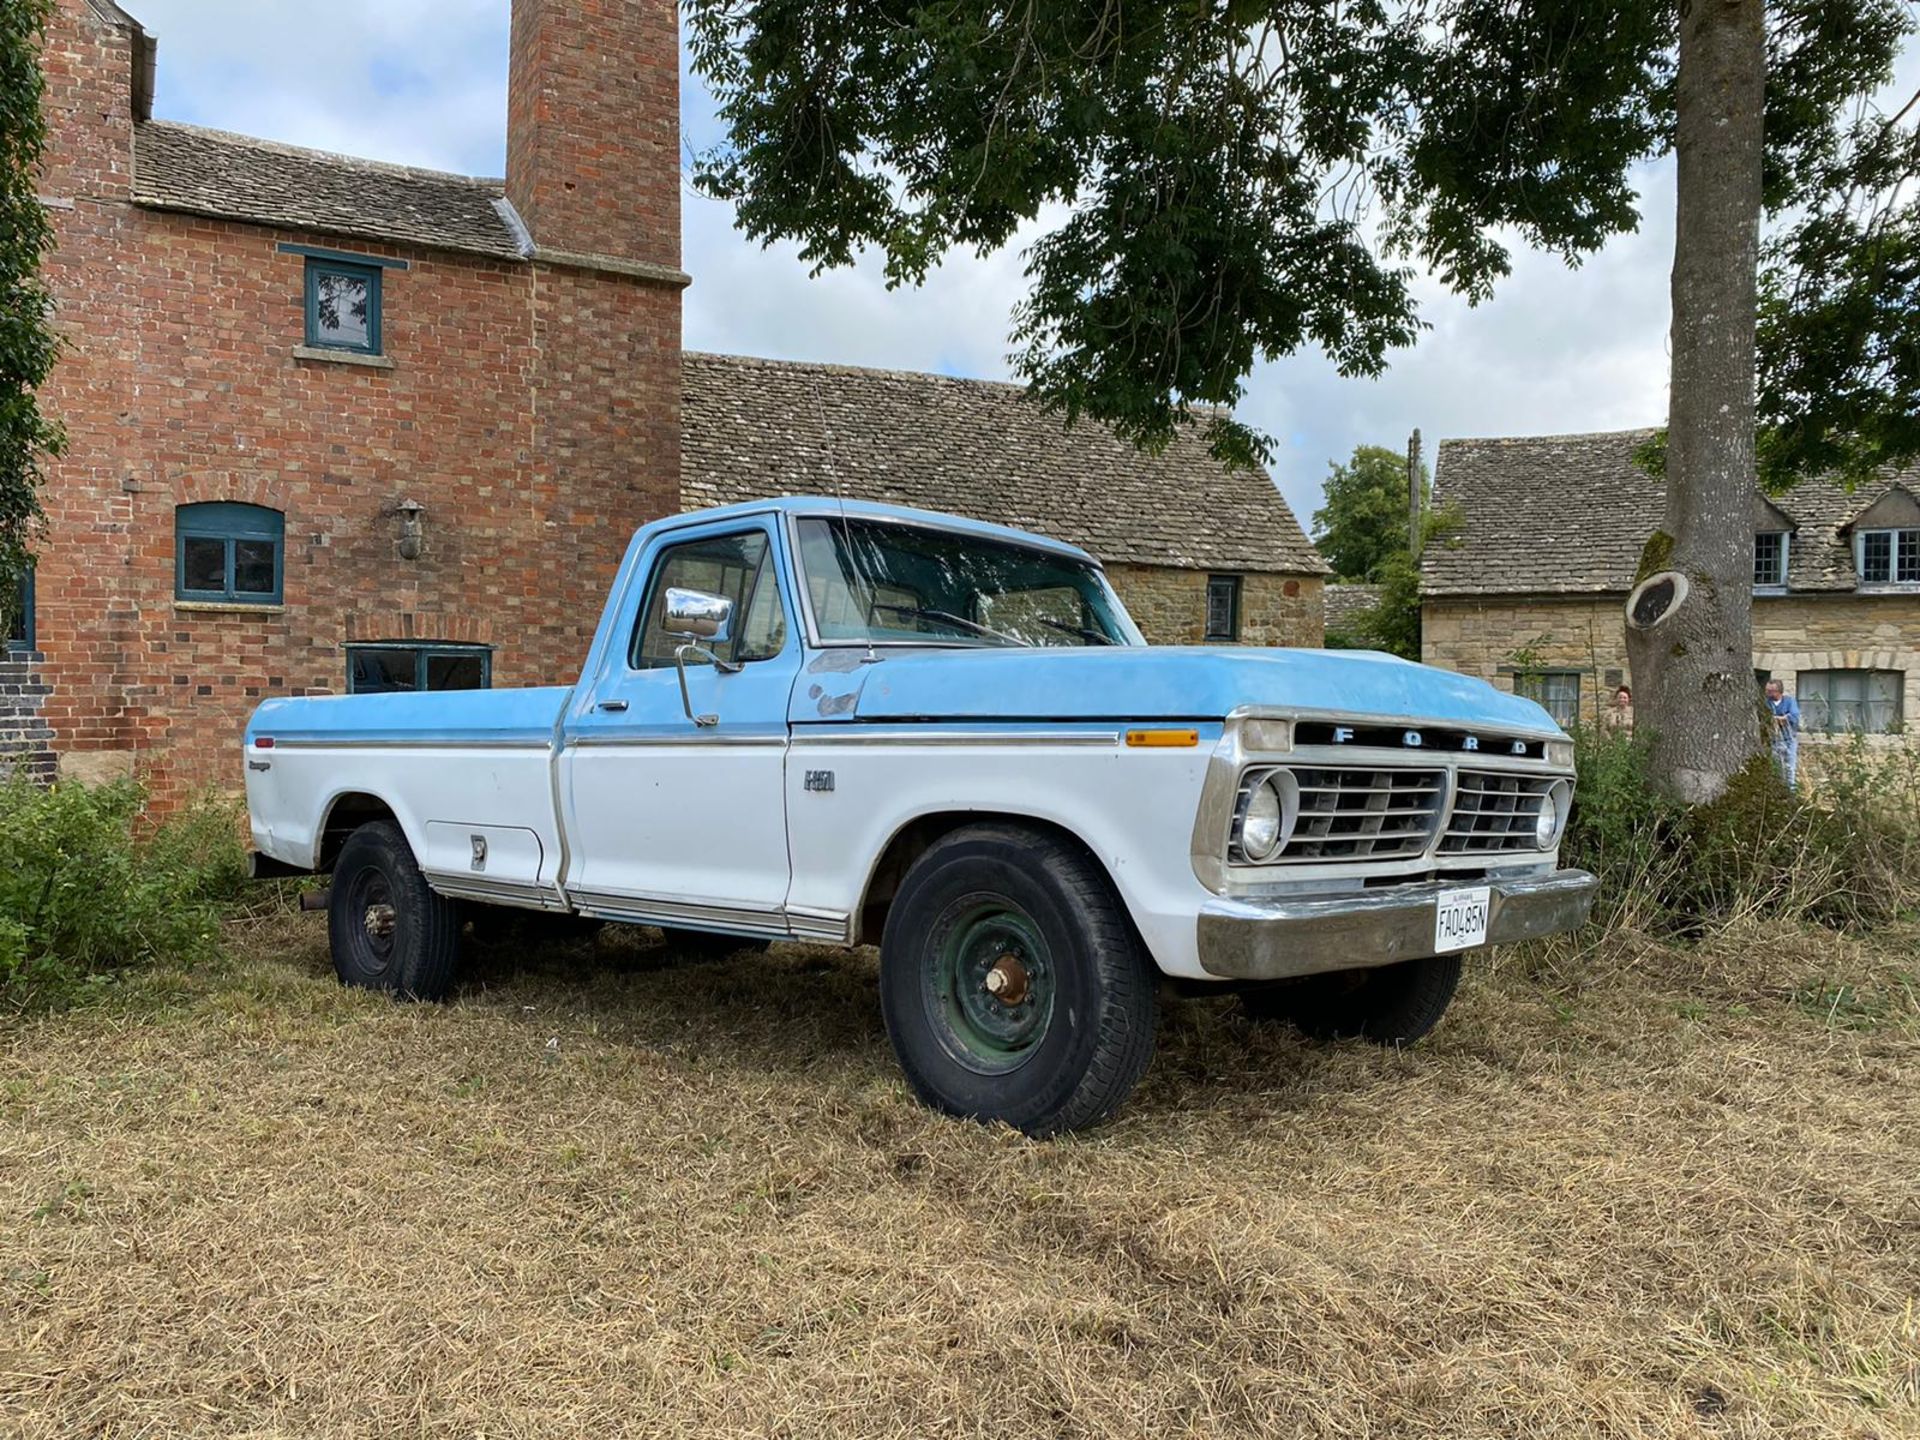 1975 FORD F-250 6.4 (390) V8, 4 SPEED MANUAL, HAS JUST BEEN REGISTERED, NEW BENCH SEAT *NO VAT* - Image 11 of 22